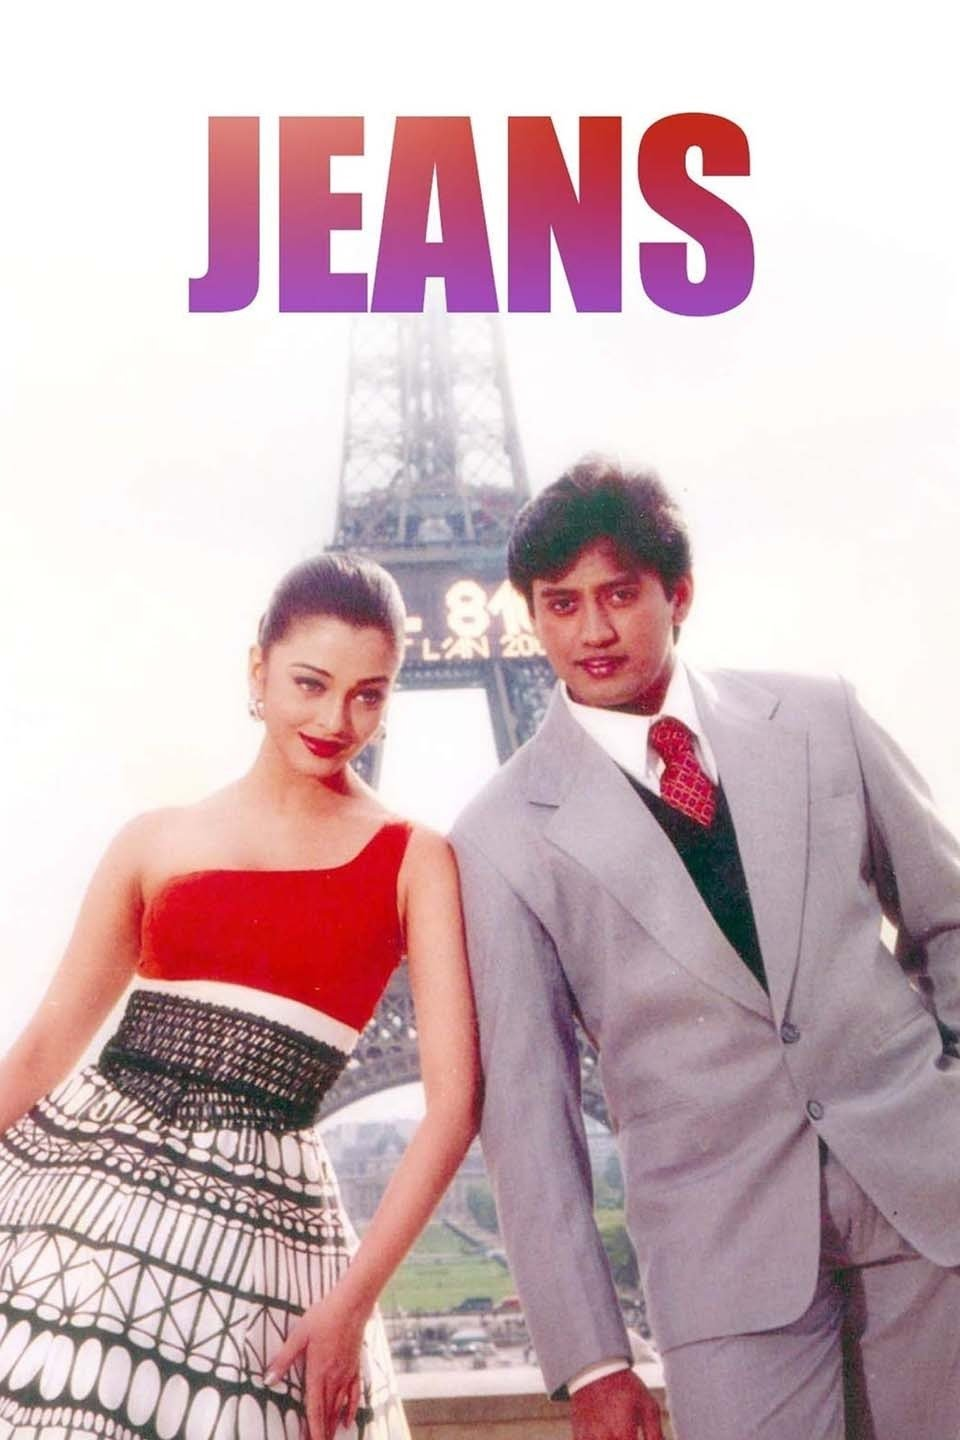 Download Jeans (1998) Full Movie for Free